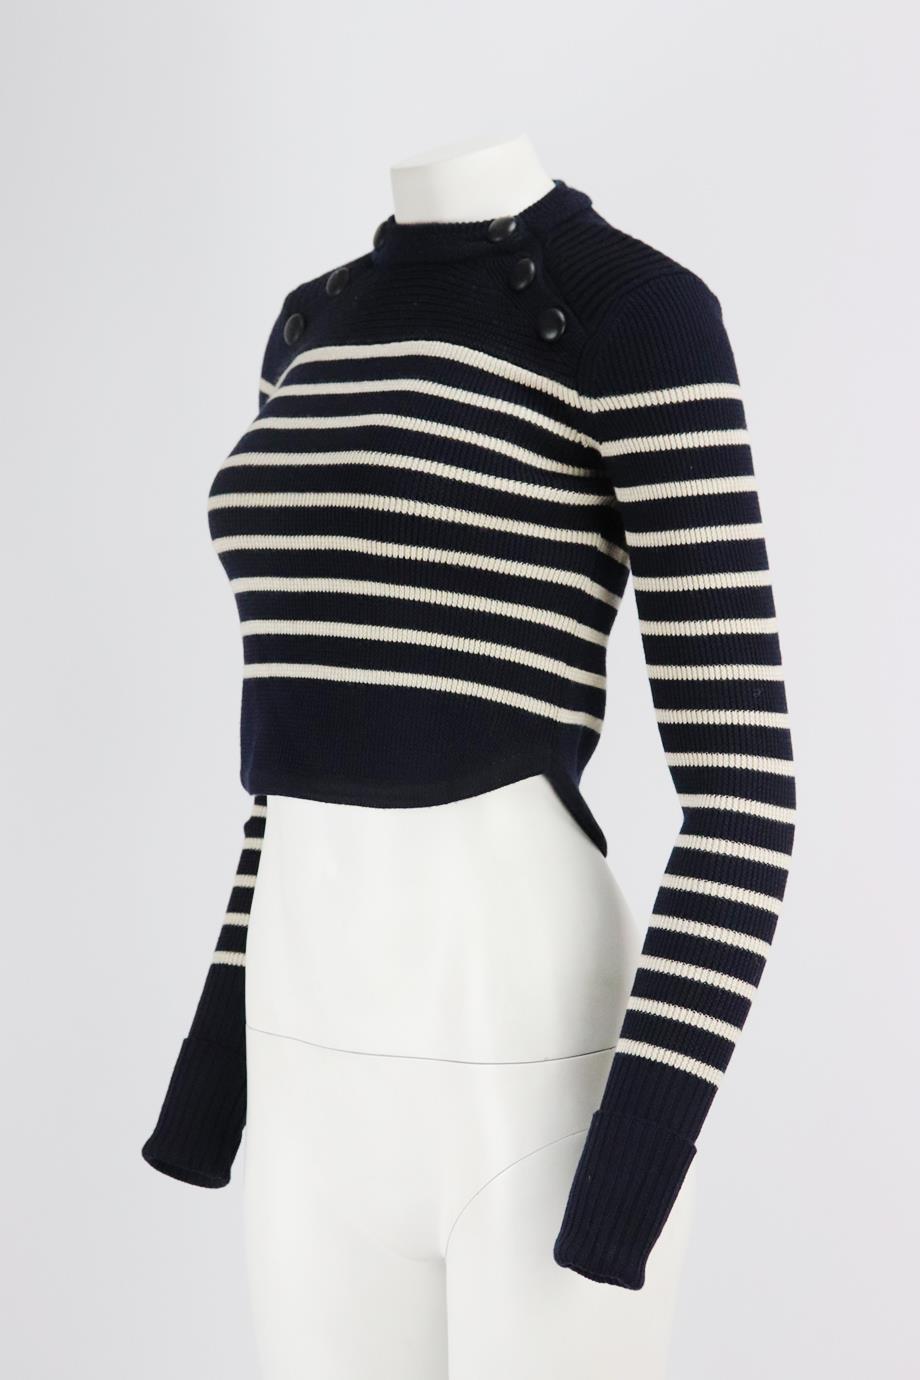 This 'Hatfield' sweater by Isabel Marant from the Fall '15 runway is crafted from extra-fine merino wool-blend for unrivalled softness, this navy and beige piece is knitted with classic Breton stripes and finished with black buttons that flatter